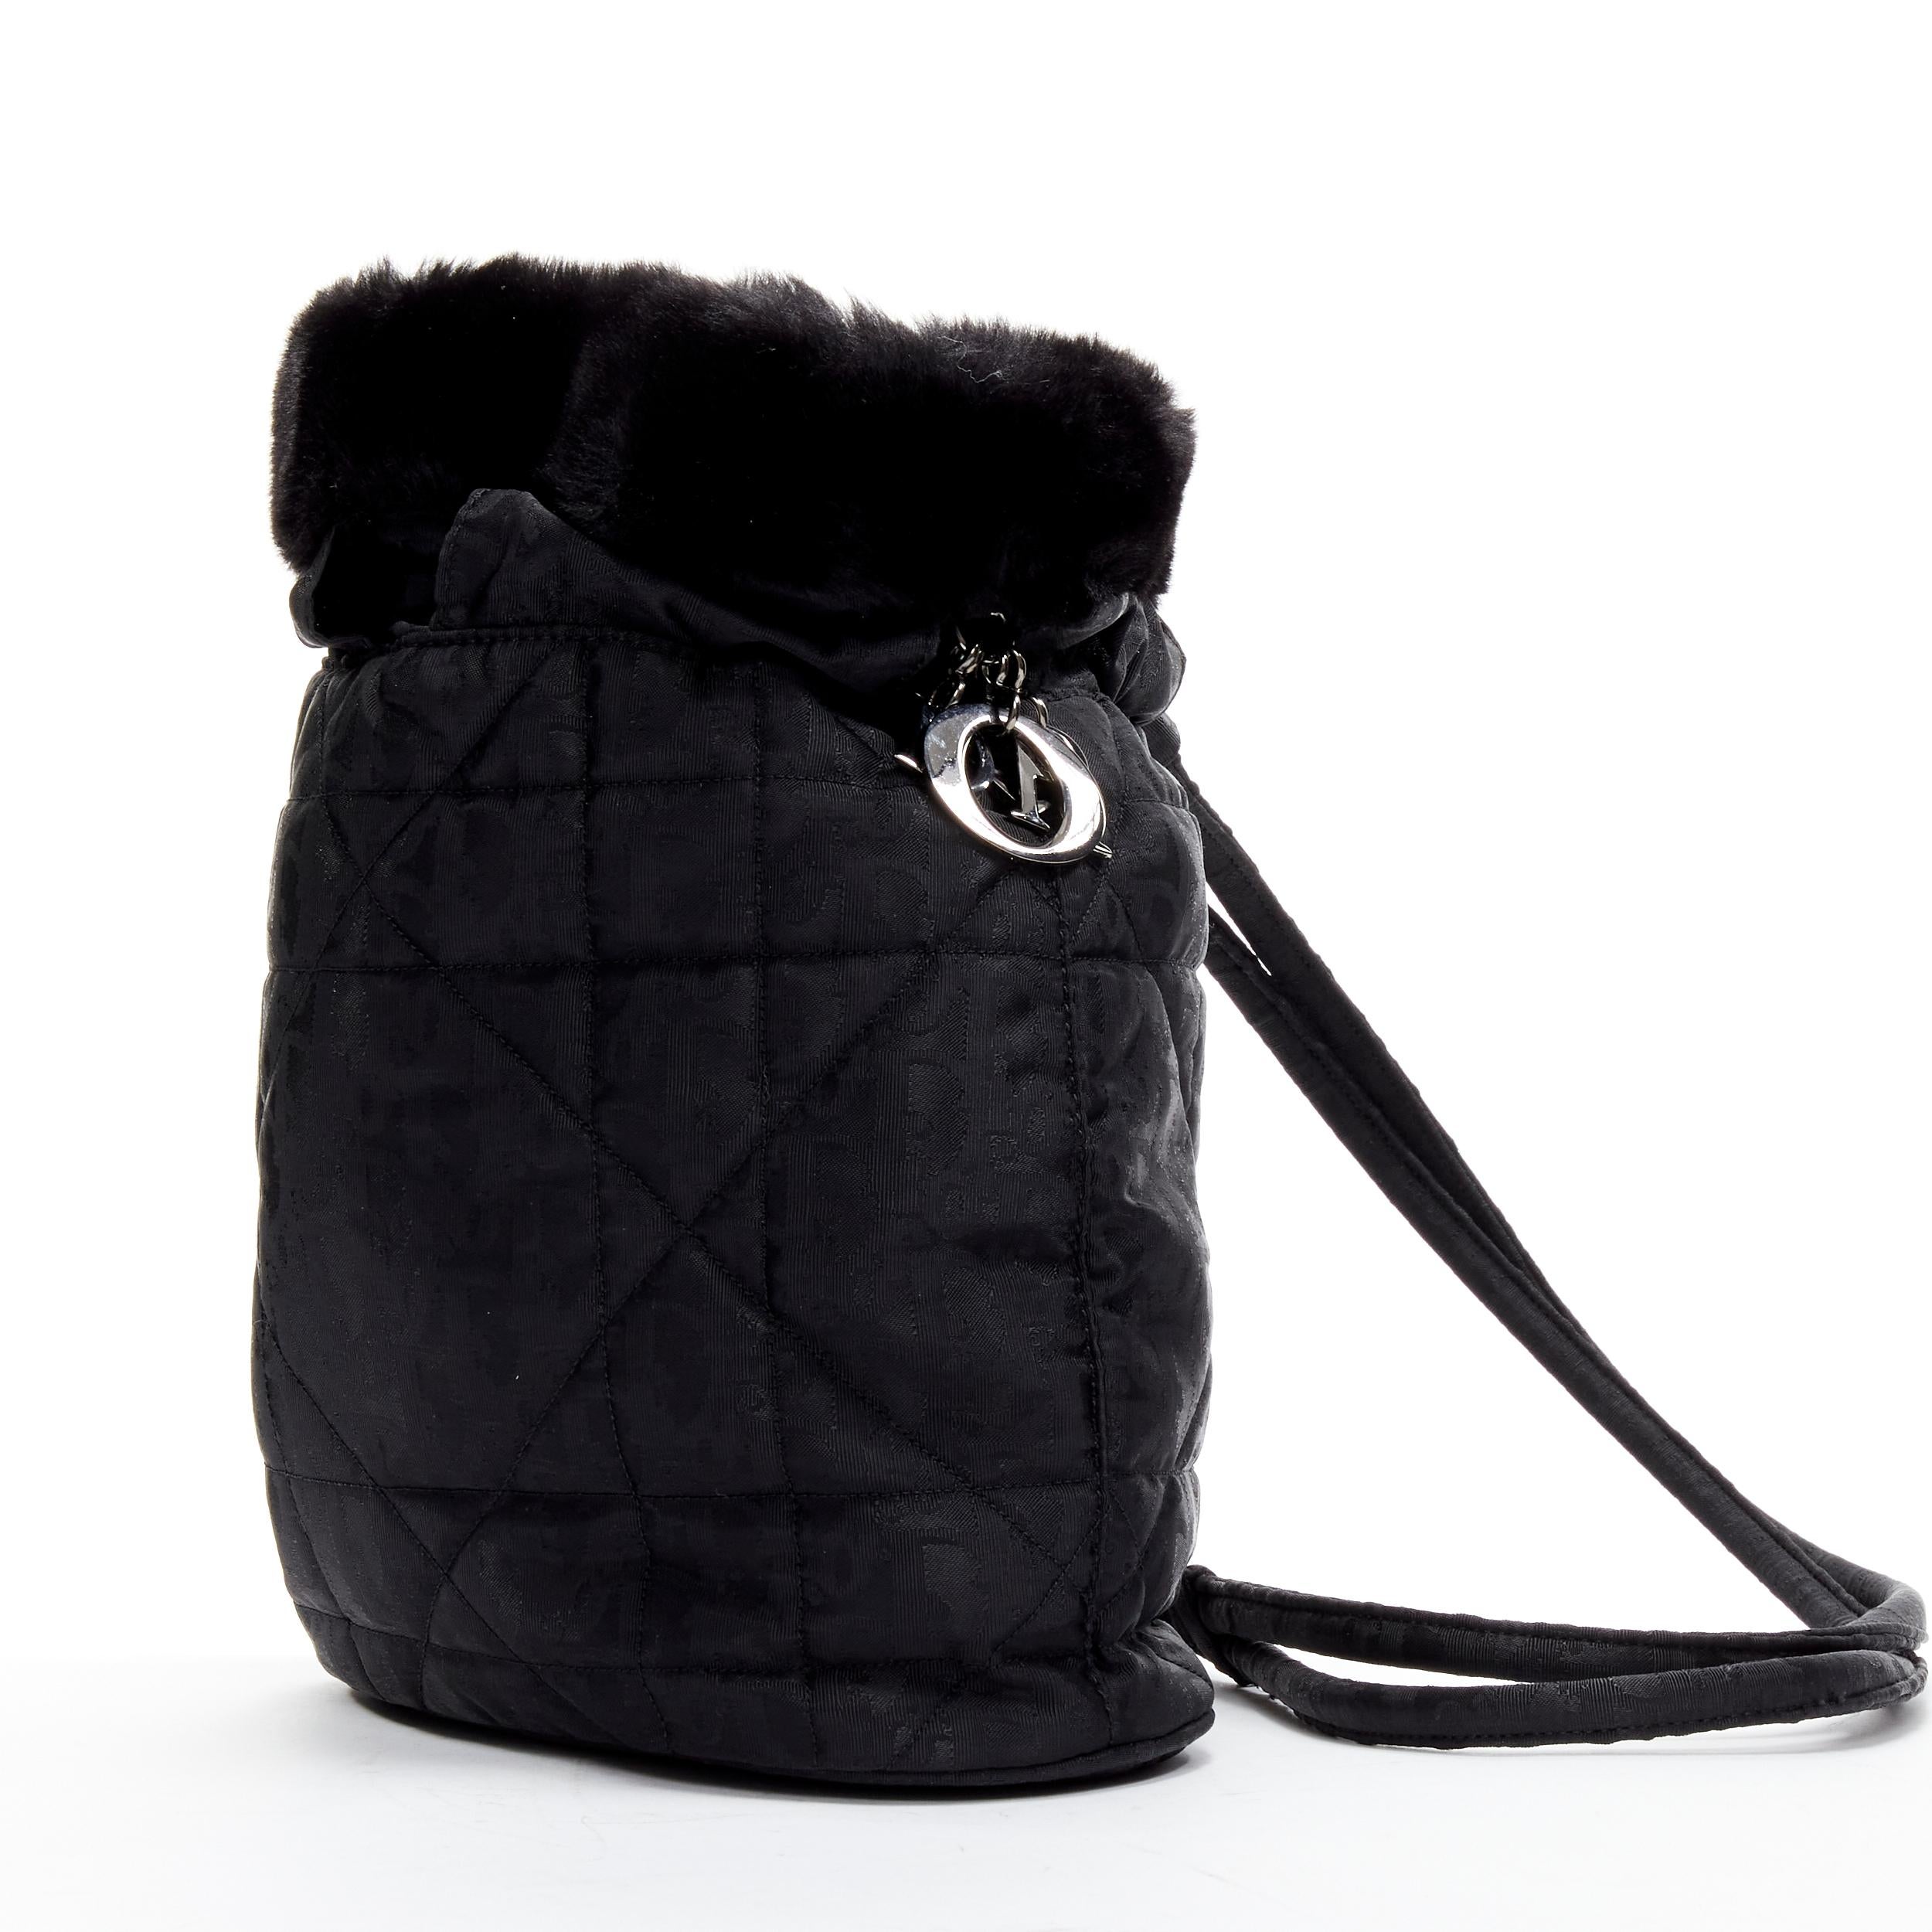 CHRISTIAN DIOR Galliano Vintage black CD charm faux fur Cannage sling backpack
Reference: TGAS/C01702
Brand: Christian Dior
Designer: John Galliano
Collection: Cannage
Material: Feels like polyester
Color: Black, Silver
Pattern: Solid
Closure: